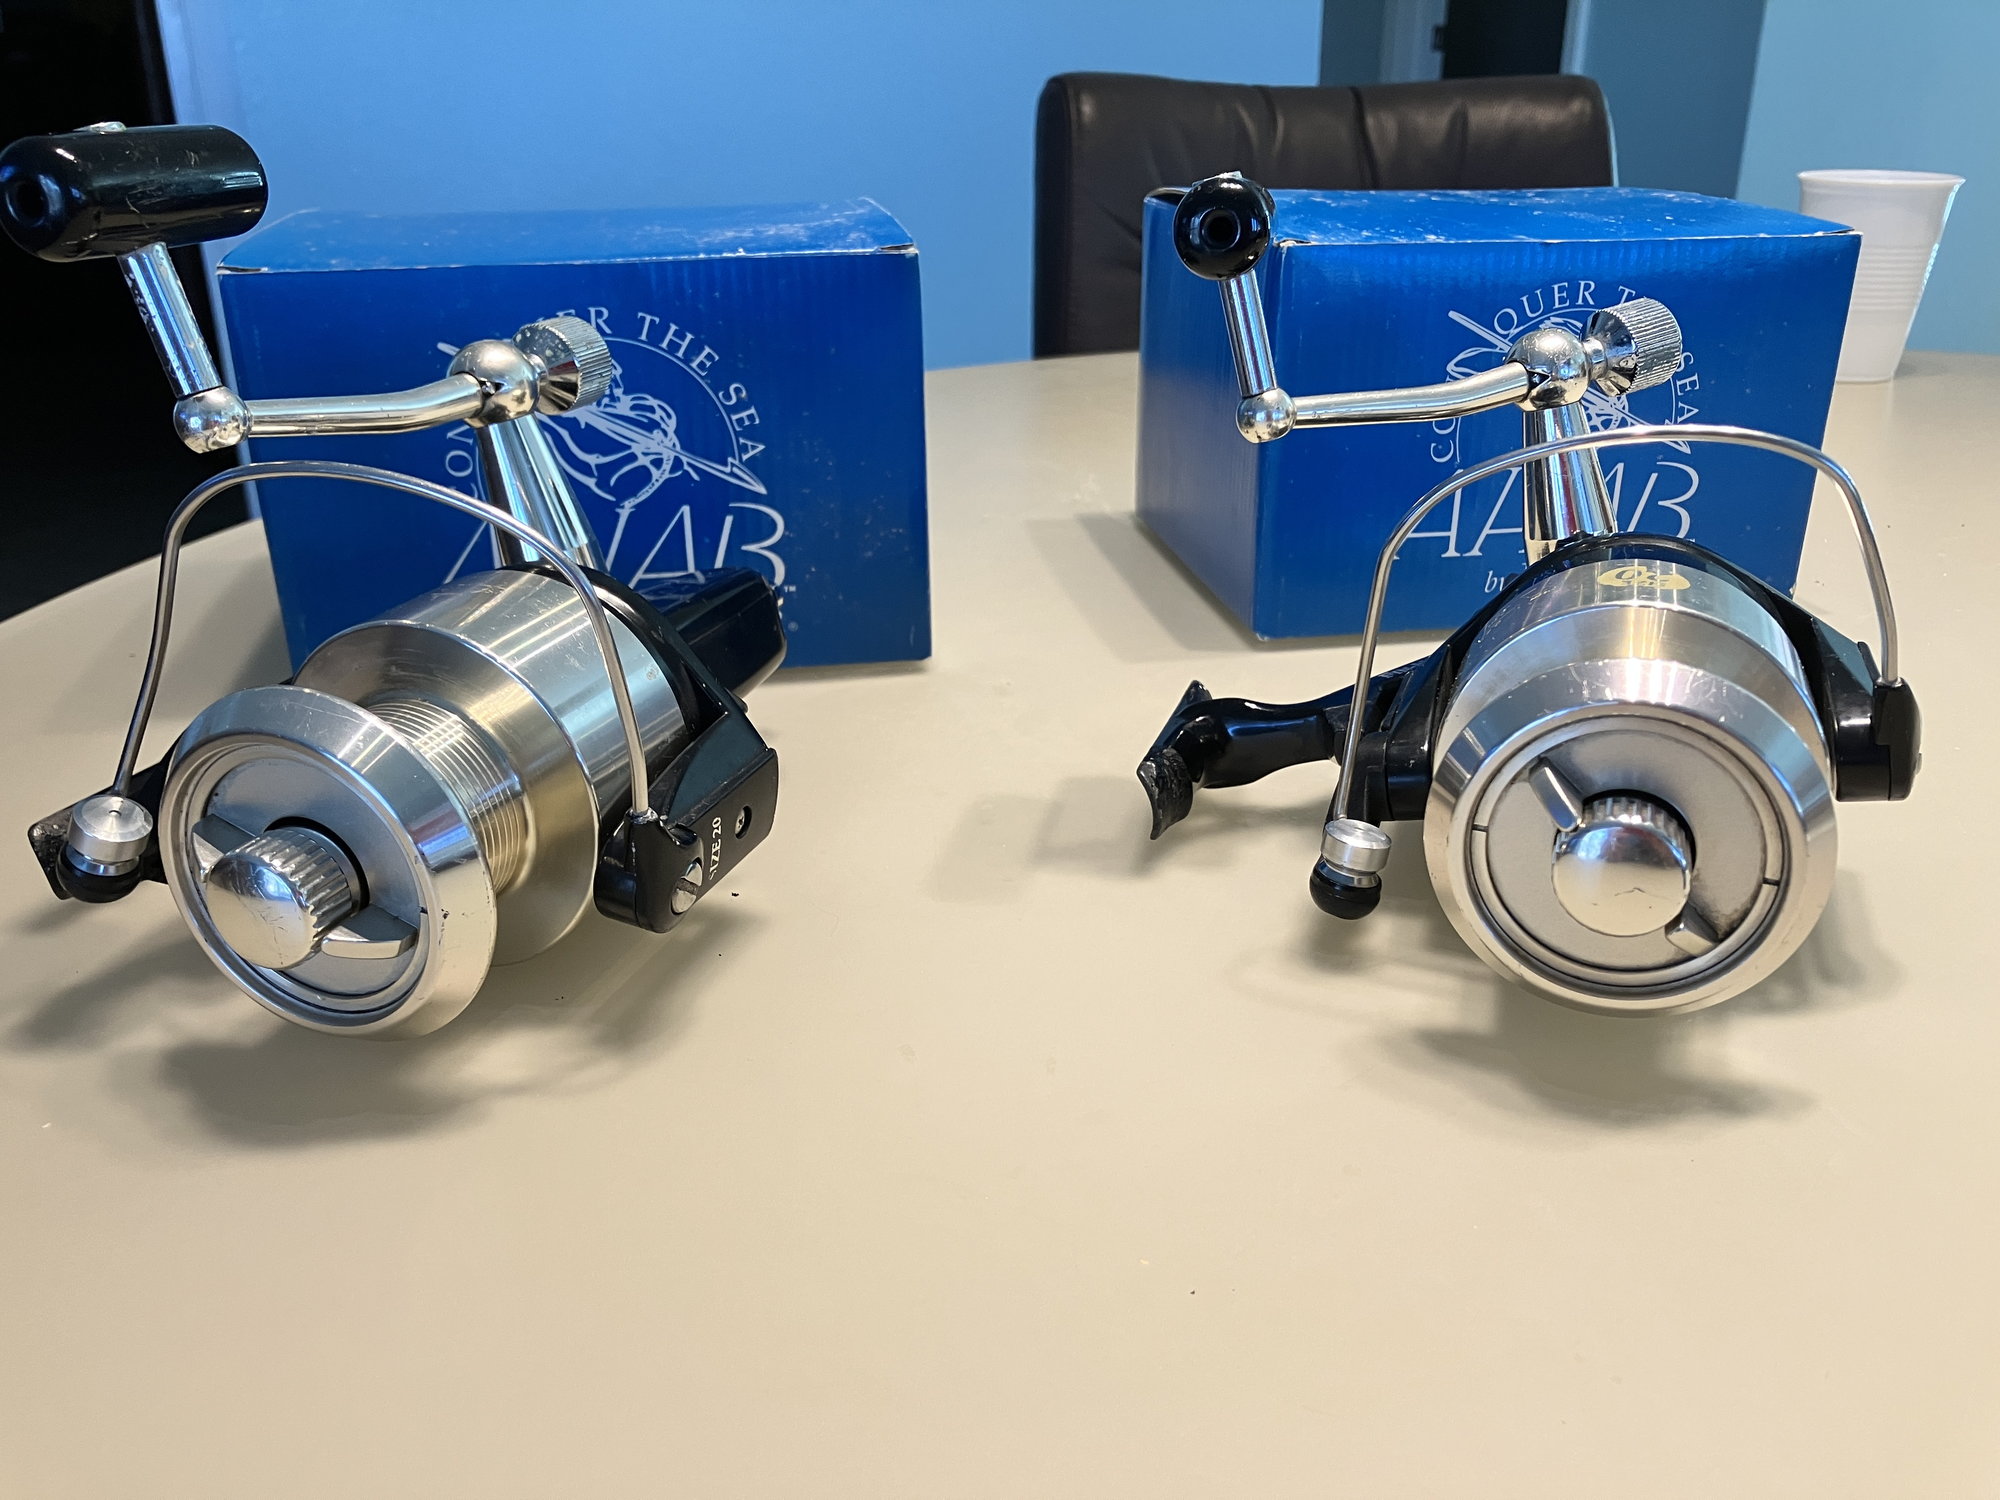 Fin-Nor Ahab 20 spinning reels and rods with original boxes. - The